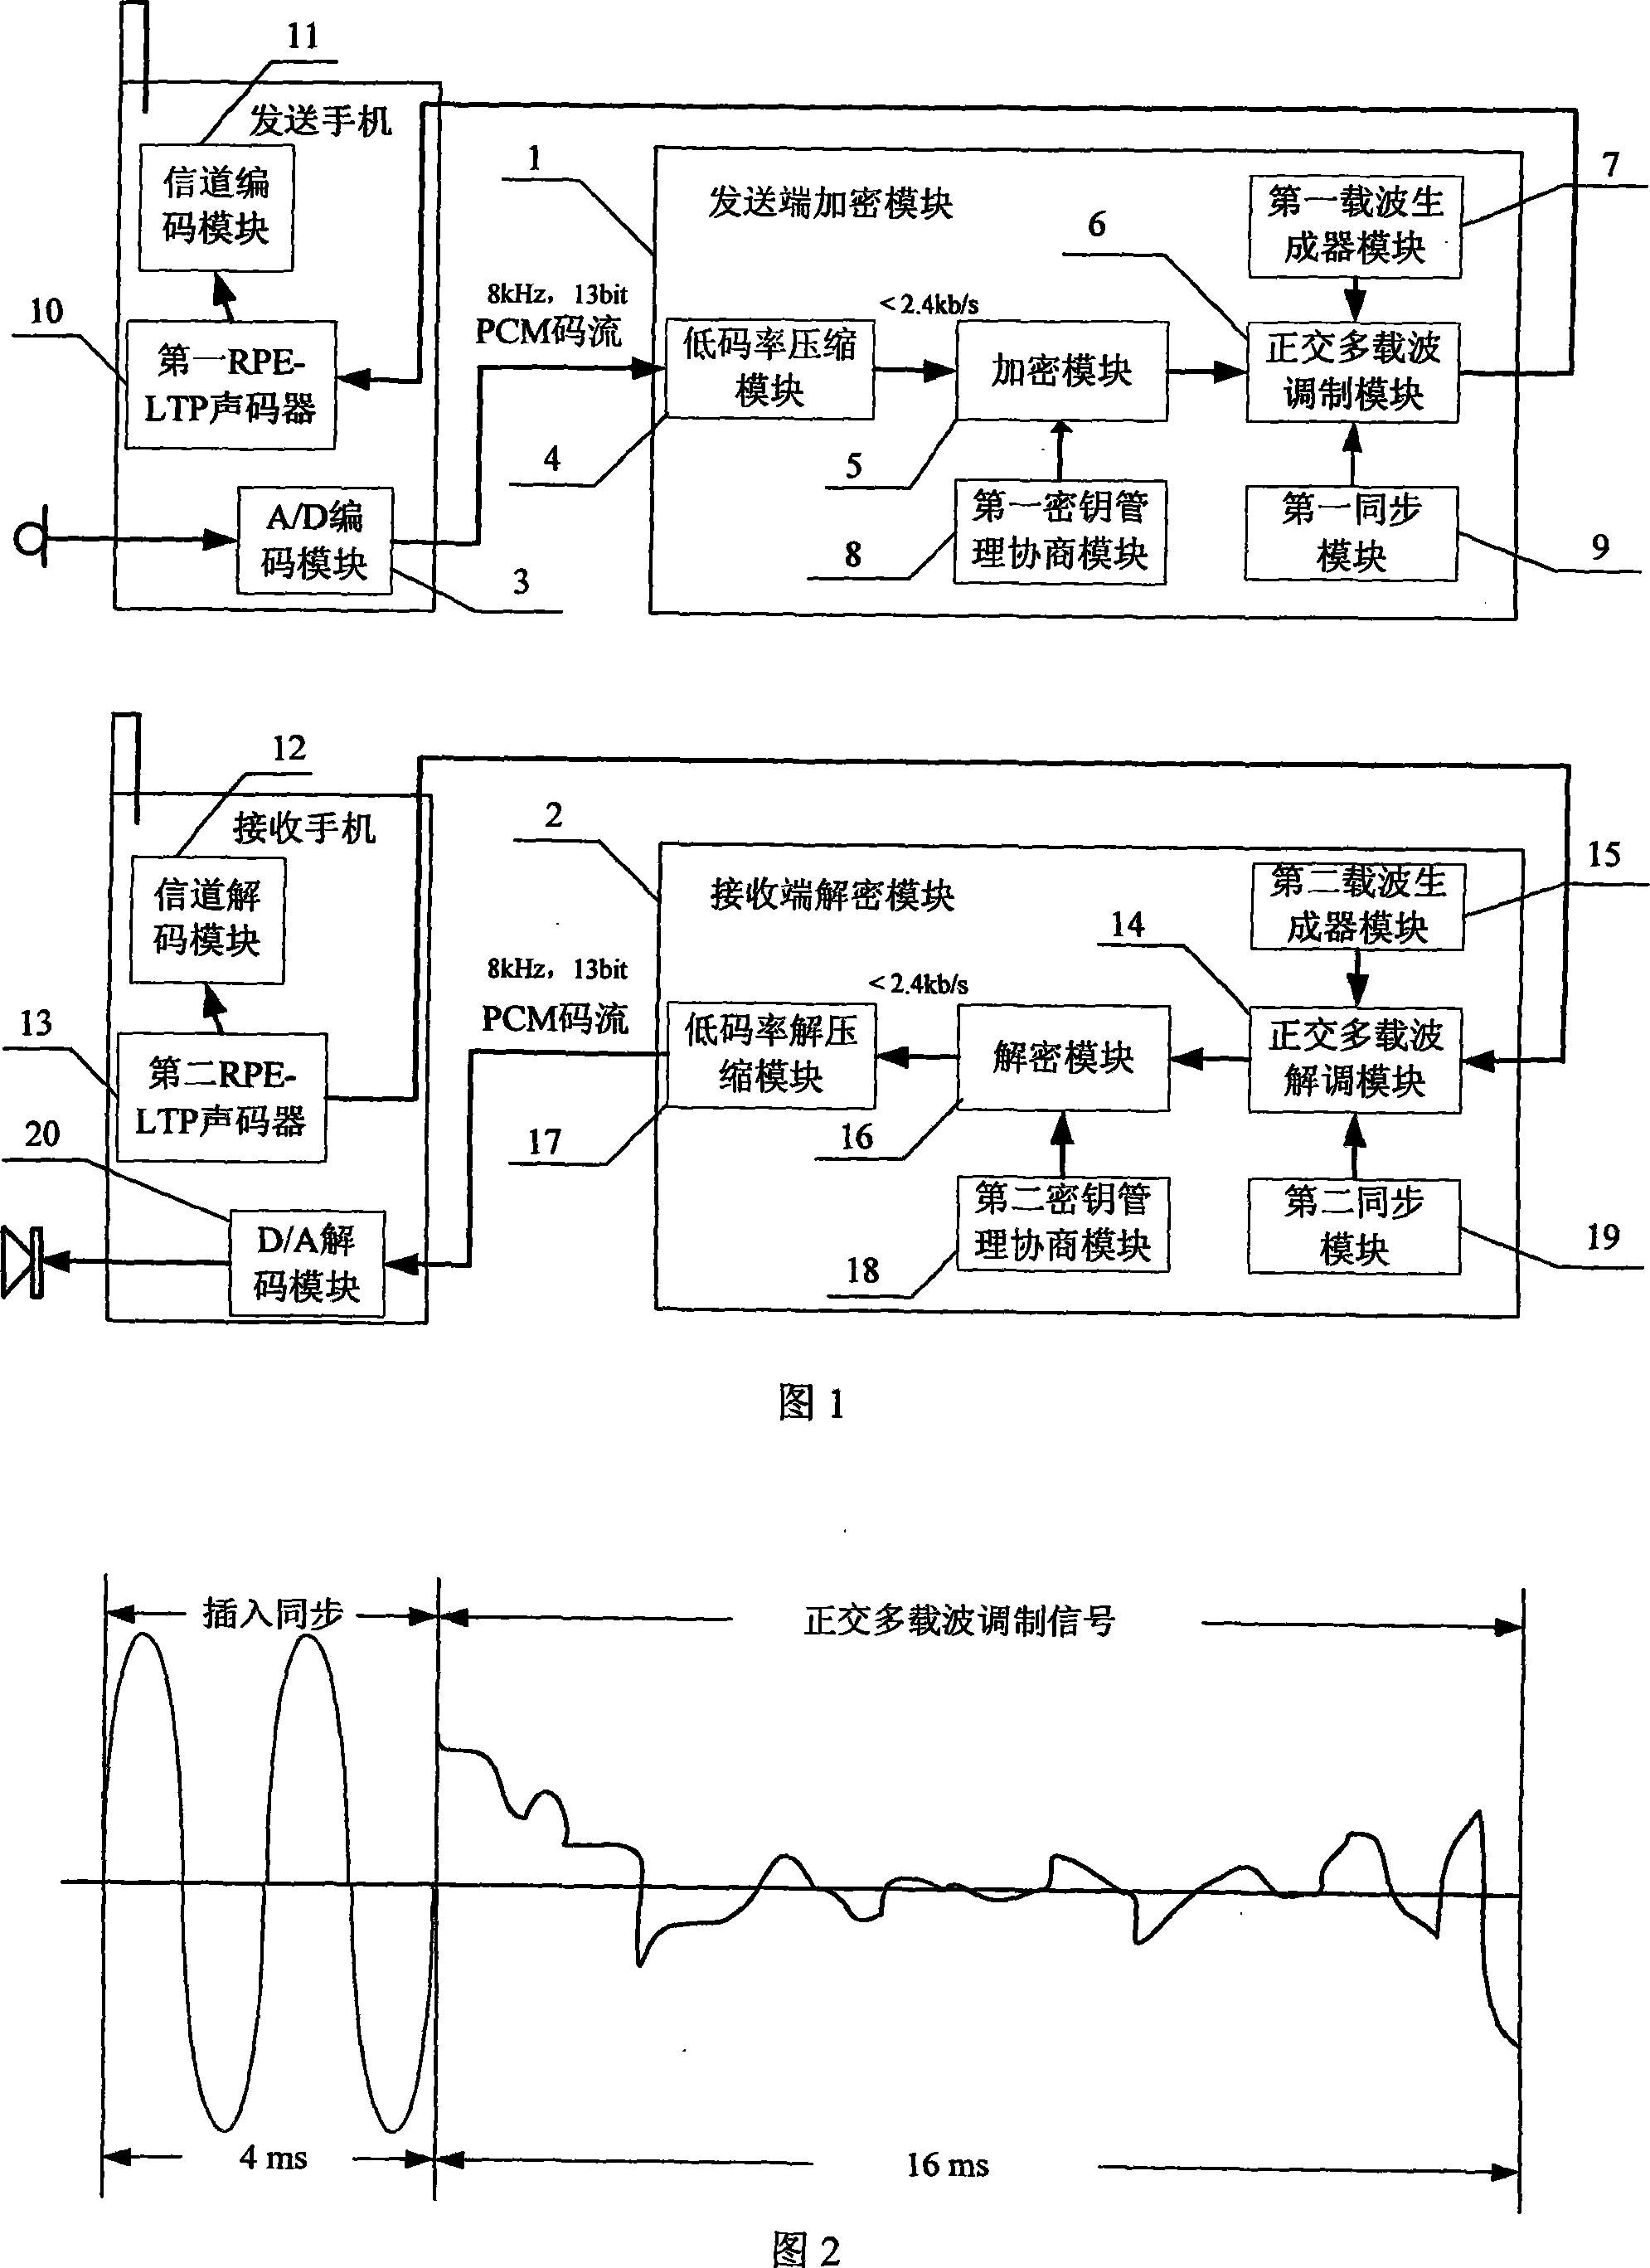 Anti vocoder compressed end-to-end voice encryption device and method